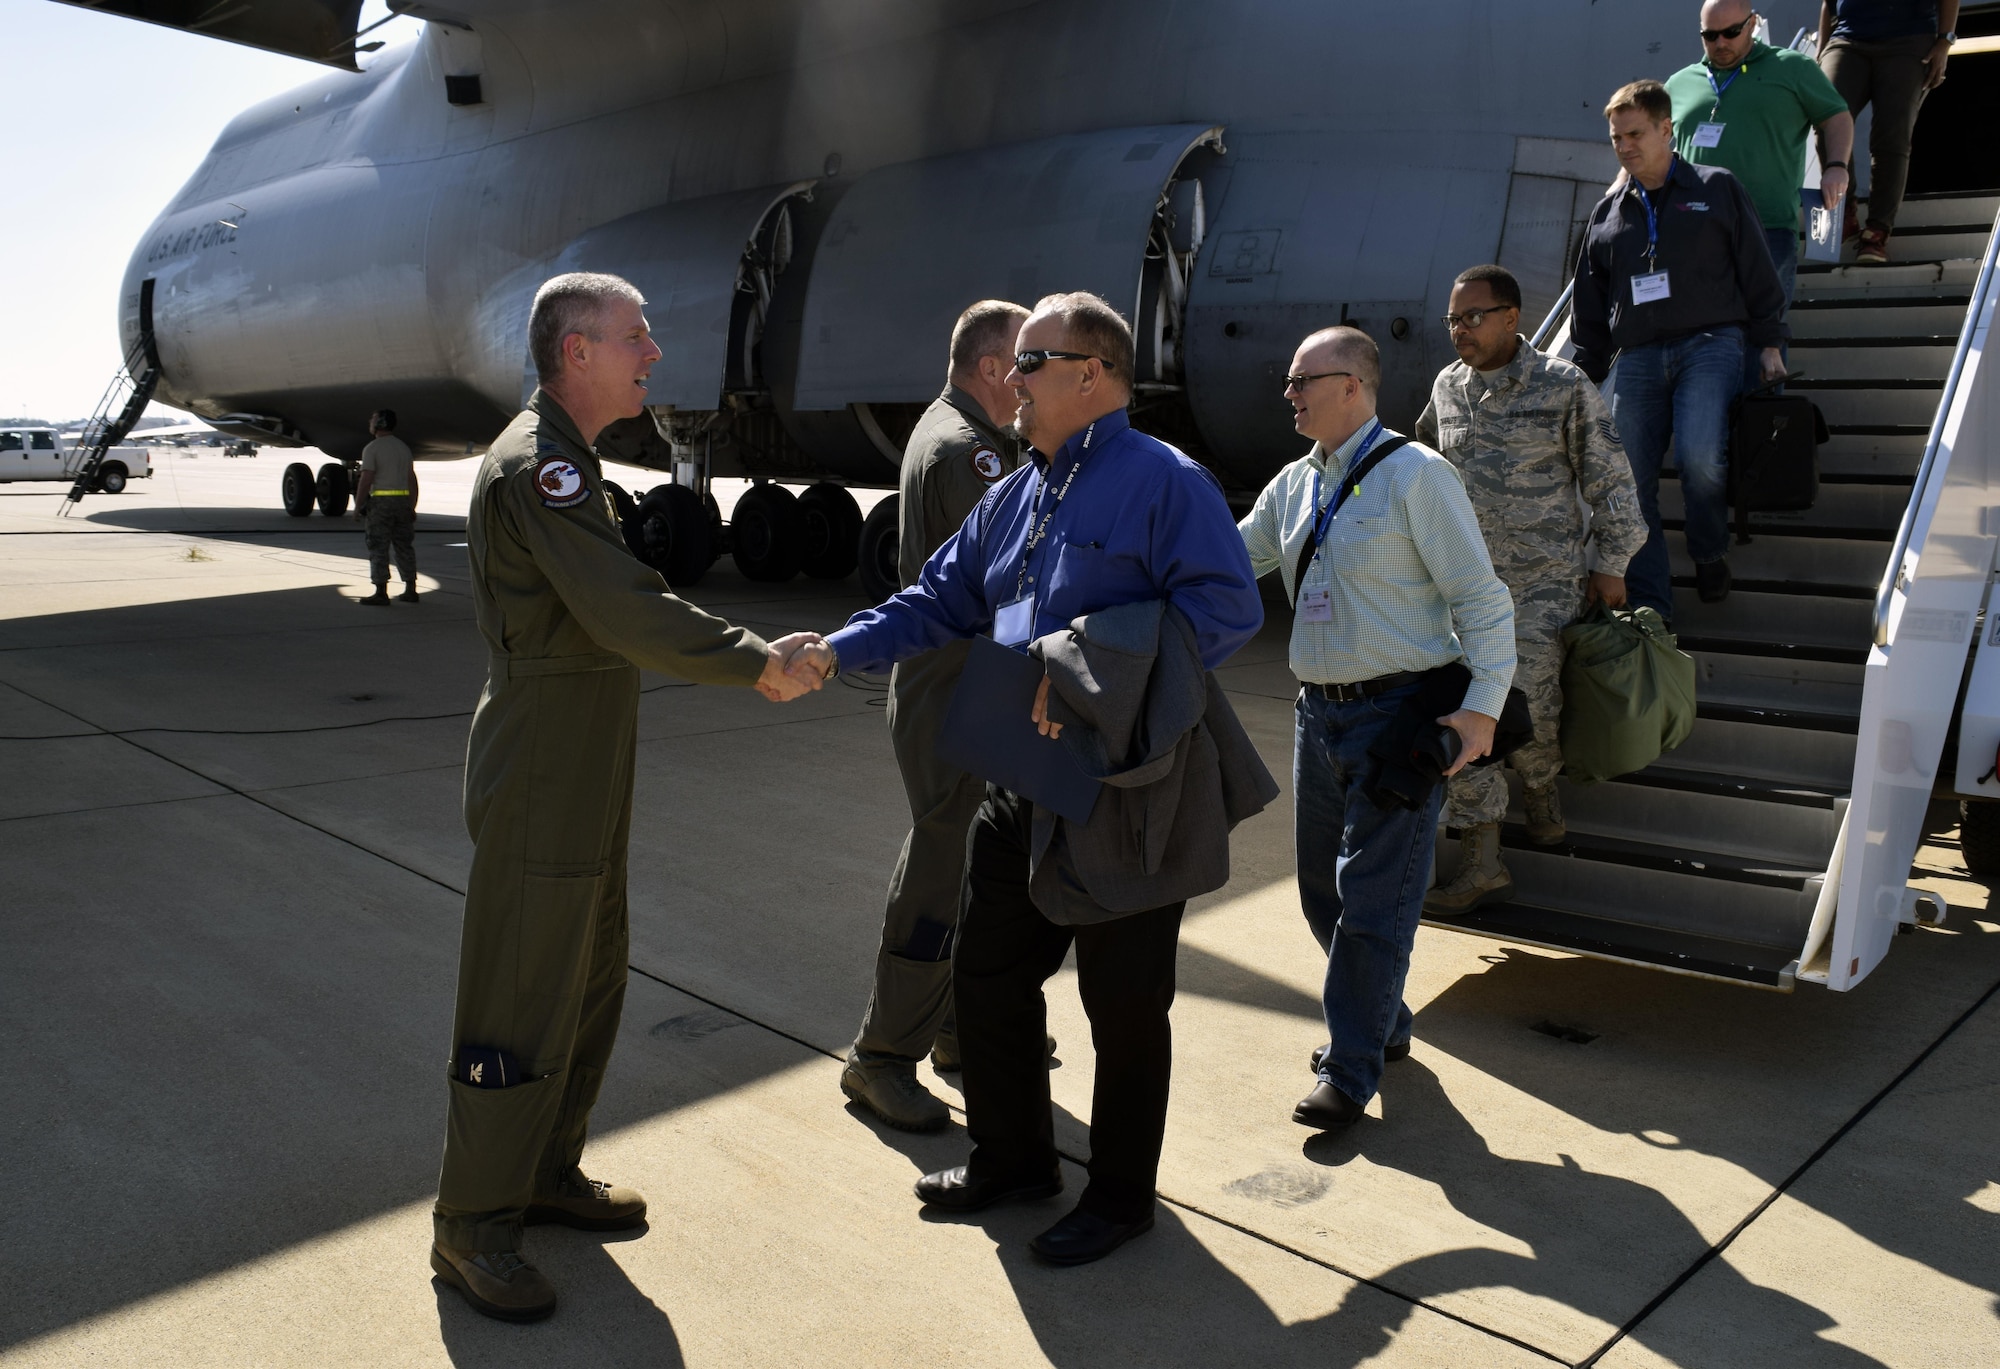 Col. James L. Morriss III, right, 307th Bomb Wing vice commander, welcomes Texas civic leaders and 433rd Airlift Wing members to Barksdale Air Force Base, La., Oct. 27, 2016 as they begin a two-day tour of the base. During their visit, community leaders toured the B-52 Stratofortress, flew in the aircraft’s simulator, and saw demonstrations by the military working dogs, explosive ordnance and life support flights. (U.S. Air Force photo by Tech. Sgt. Lindsey Maurice)